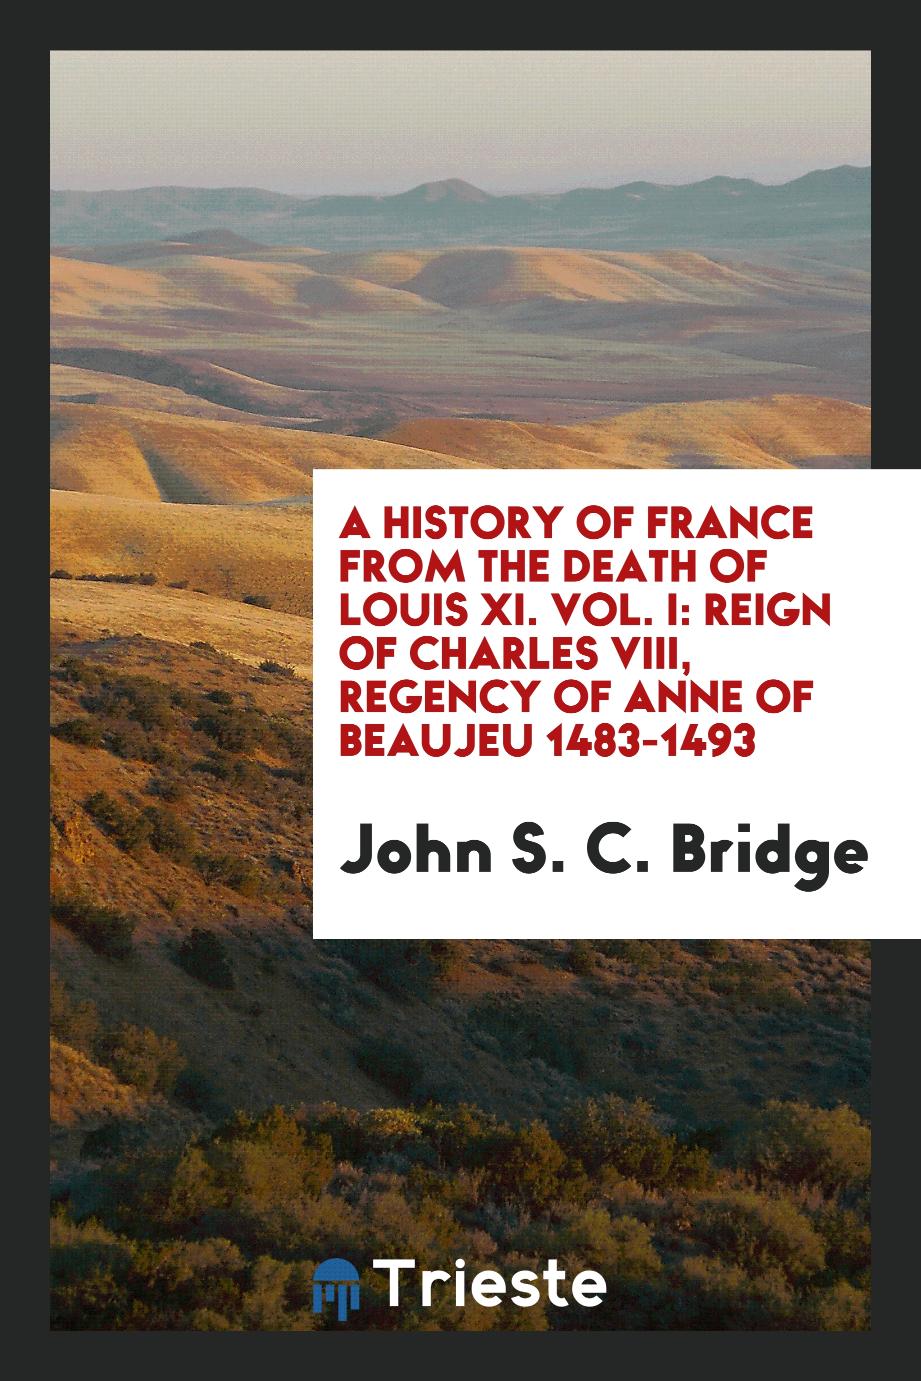 A History of France from the Death of Louis XI. Vol. I: Reign of Charles VIII, Regency of Anne of Beaujeu 1483-1493